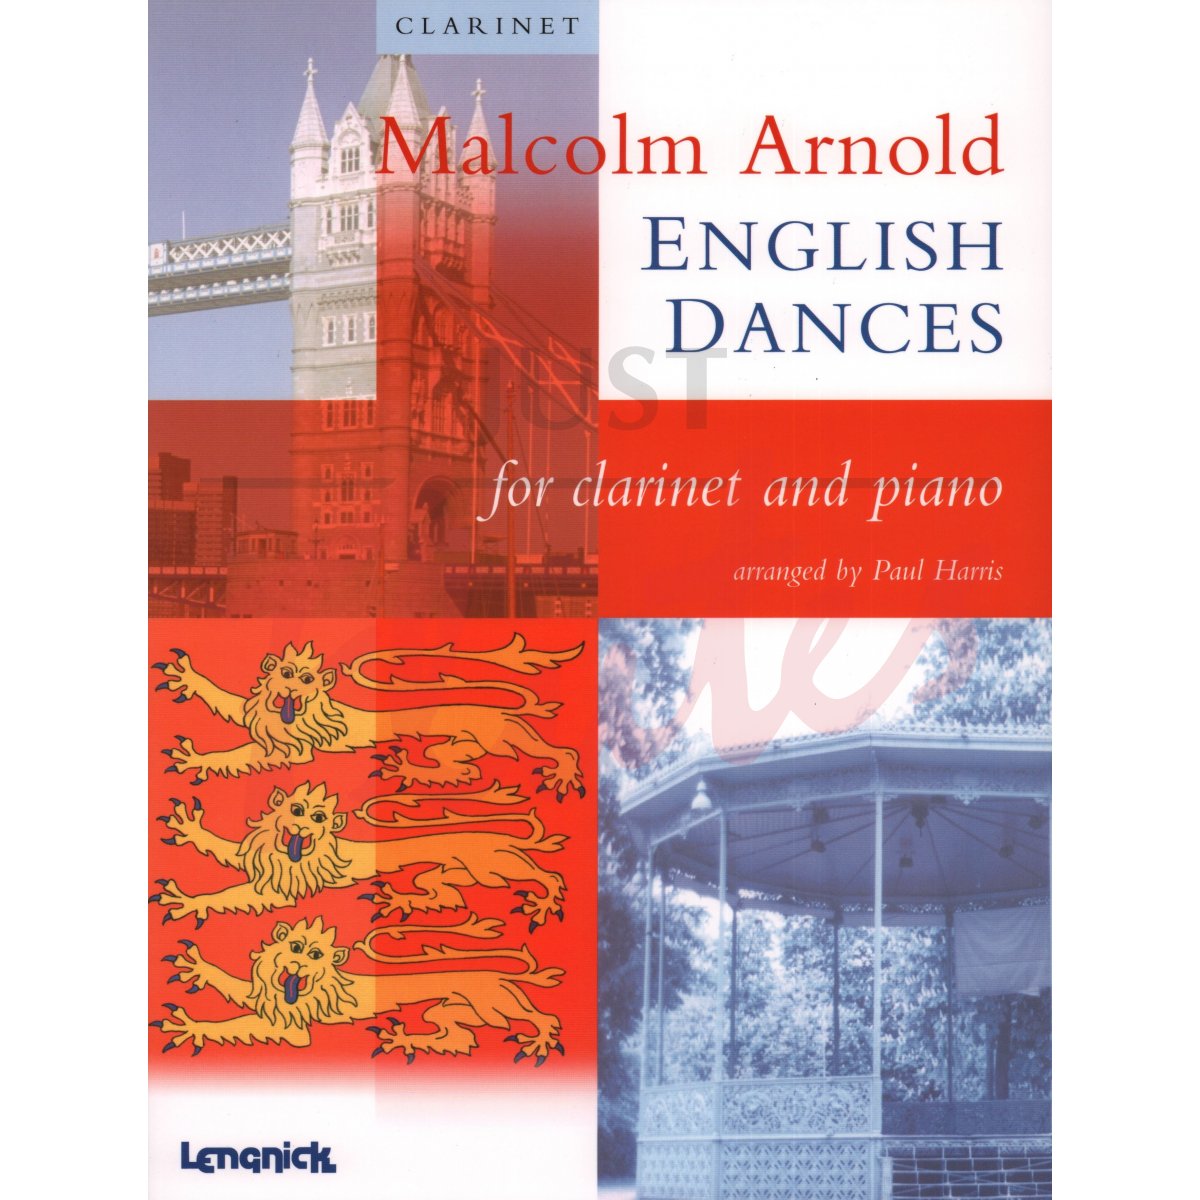 English Dances for Clarinet and Piano